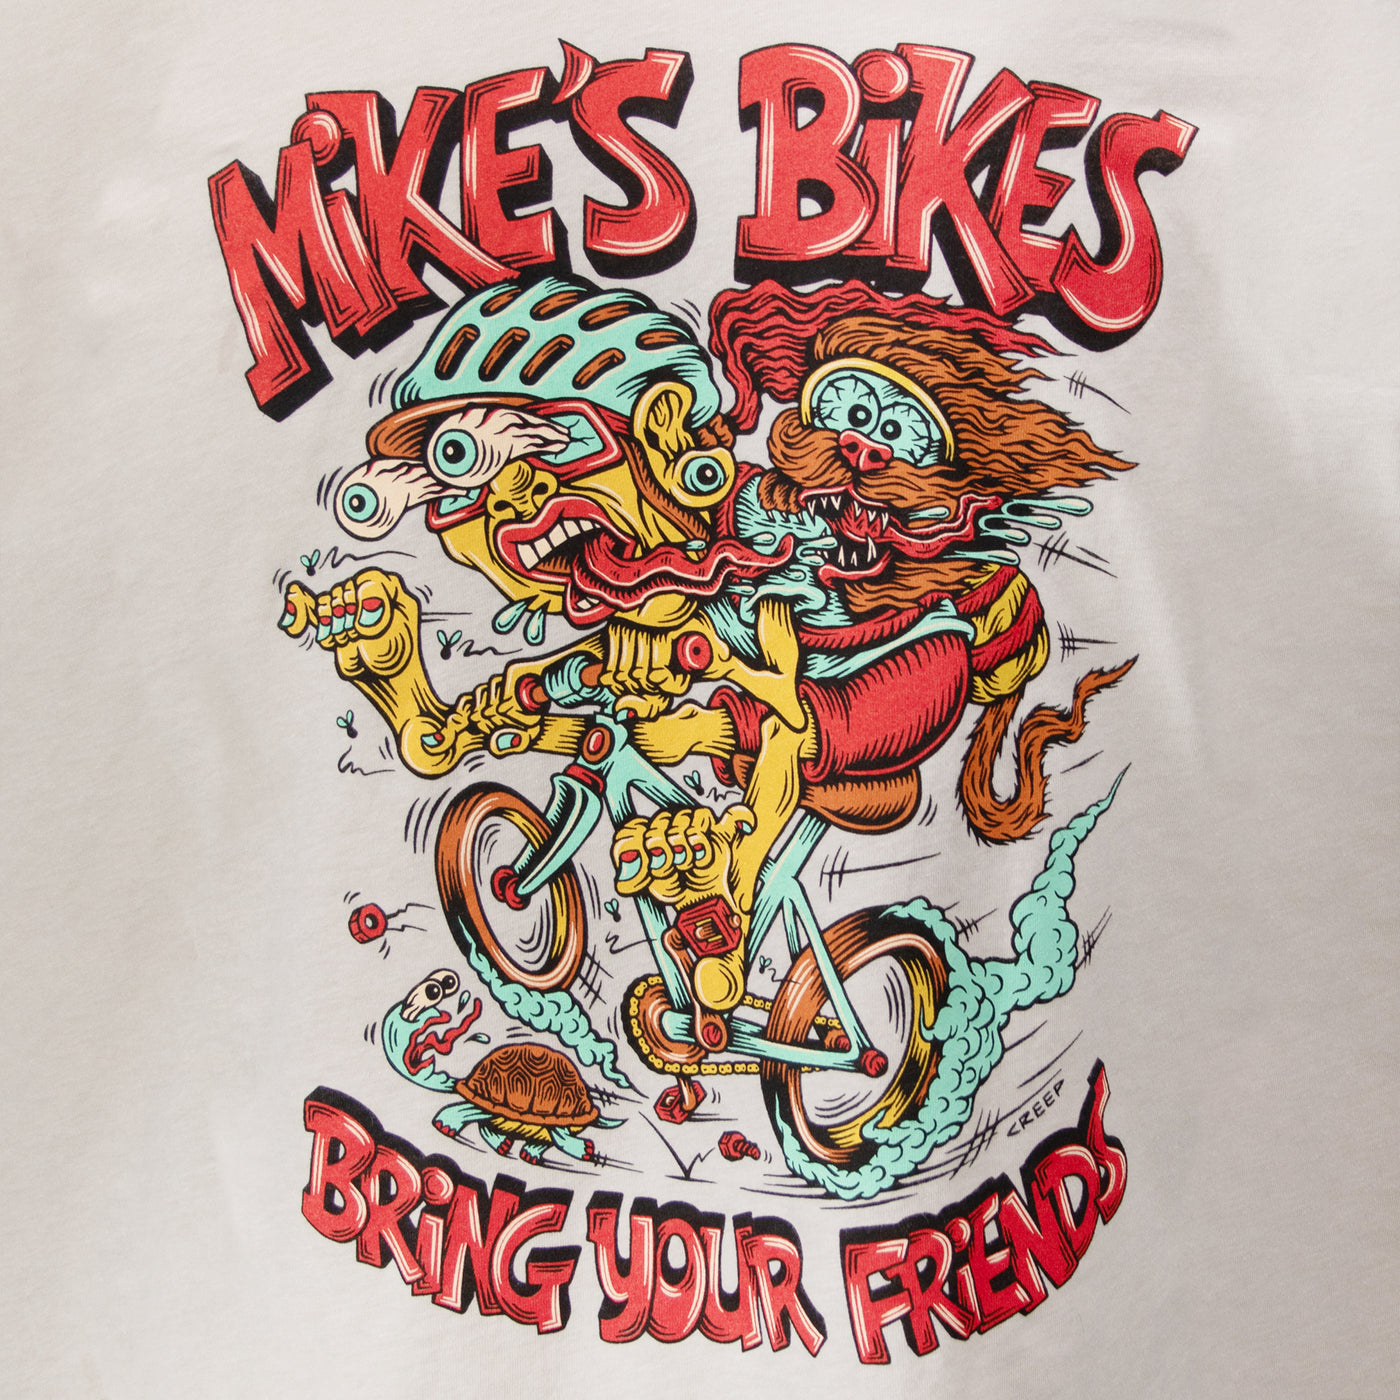 Mike's Bikes "Bring Your Friends" Tee